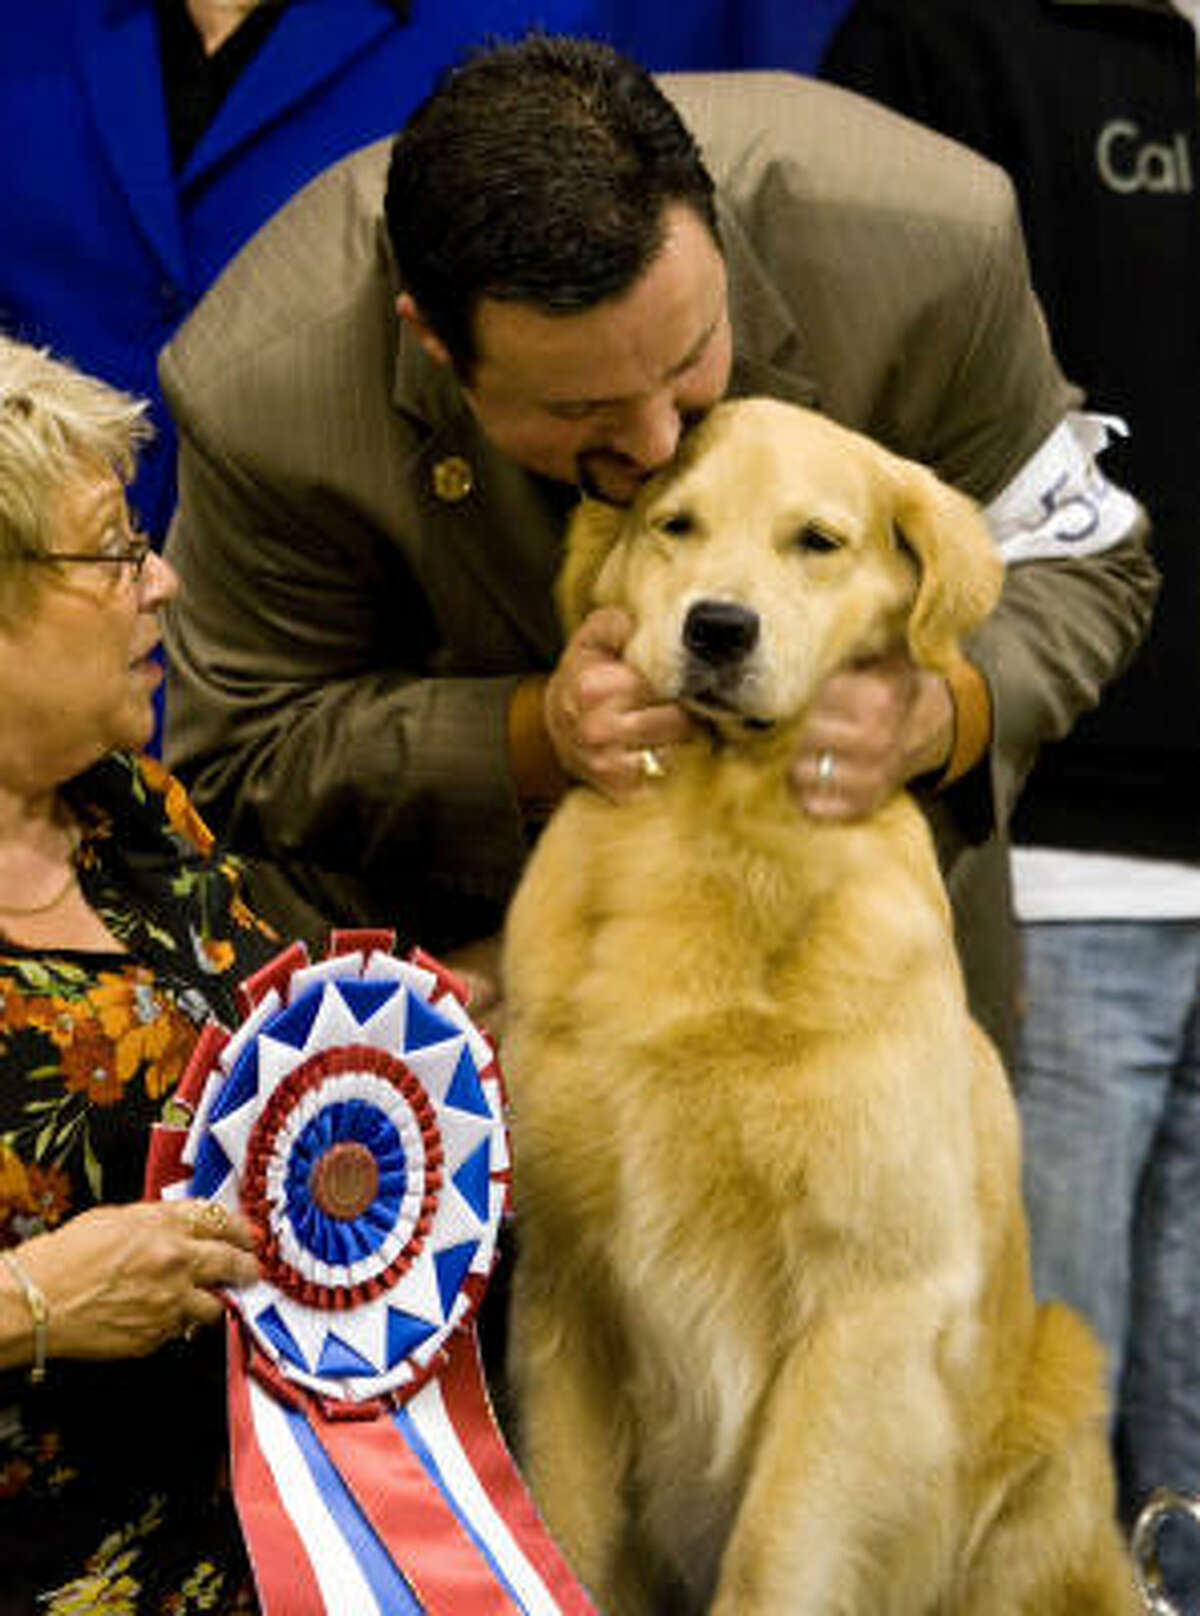 Dog show handler Clint Livingston shows his appreciation for a Golden Retriever named Champion of Toasty's Treasure Island who won the Reliant Park World Series of Dog Shows' Best in Show. Livingston is from Brighton, Colorado and "Treasure" is owned by Pam and Jerry Oxemburge who live in Boca Raton, Florida.